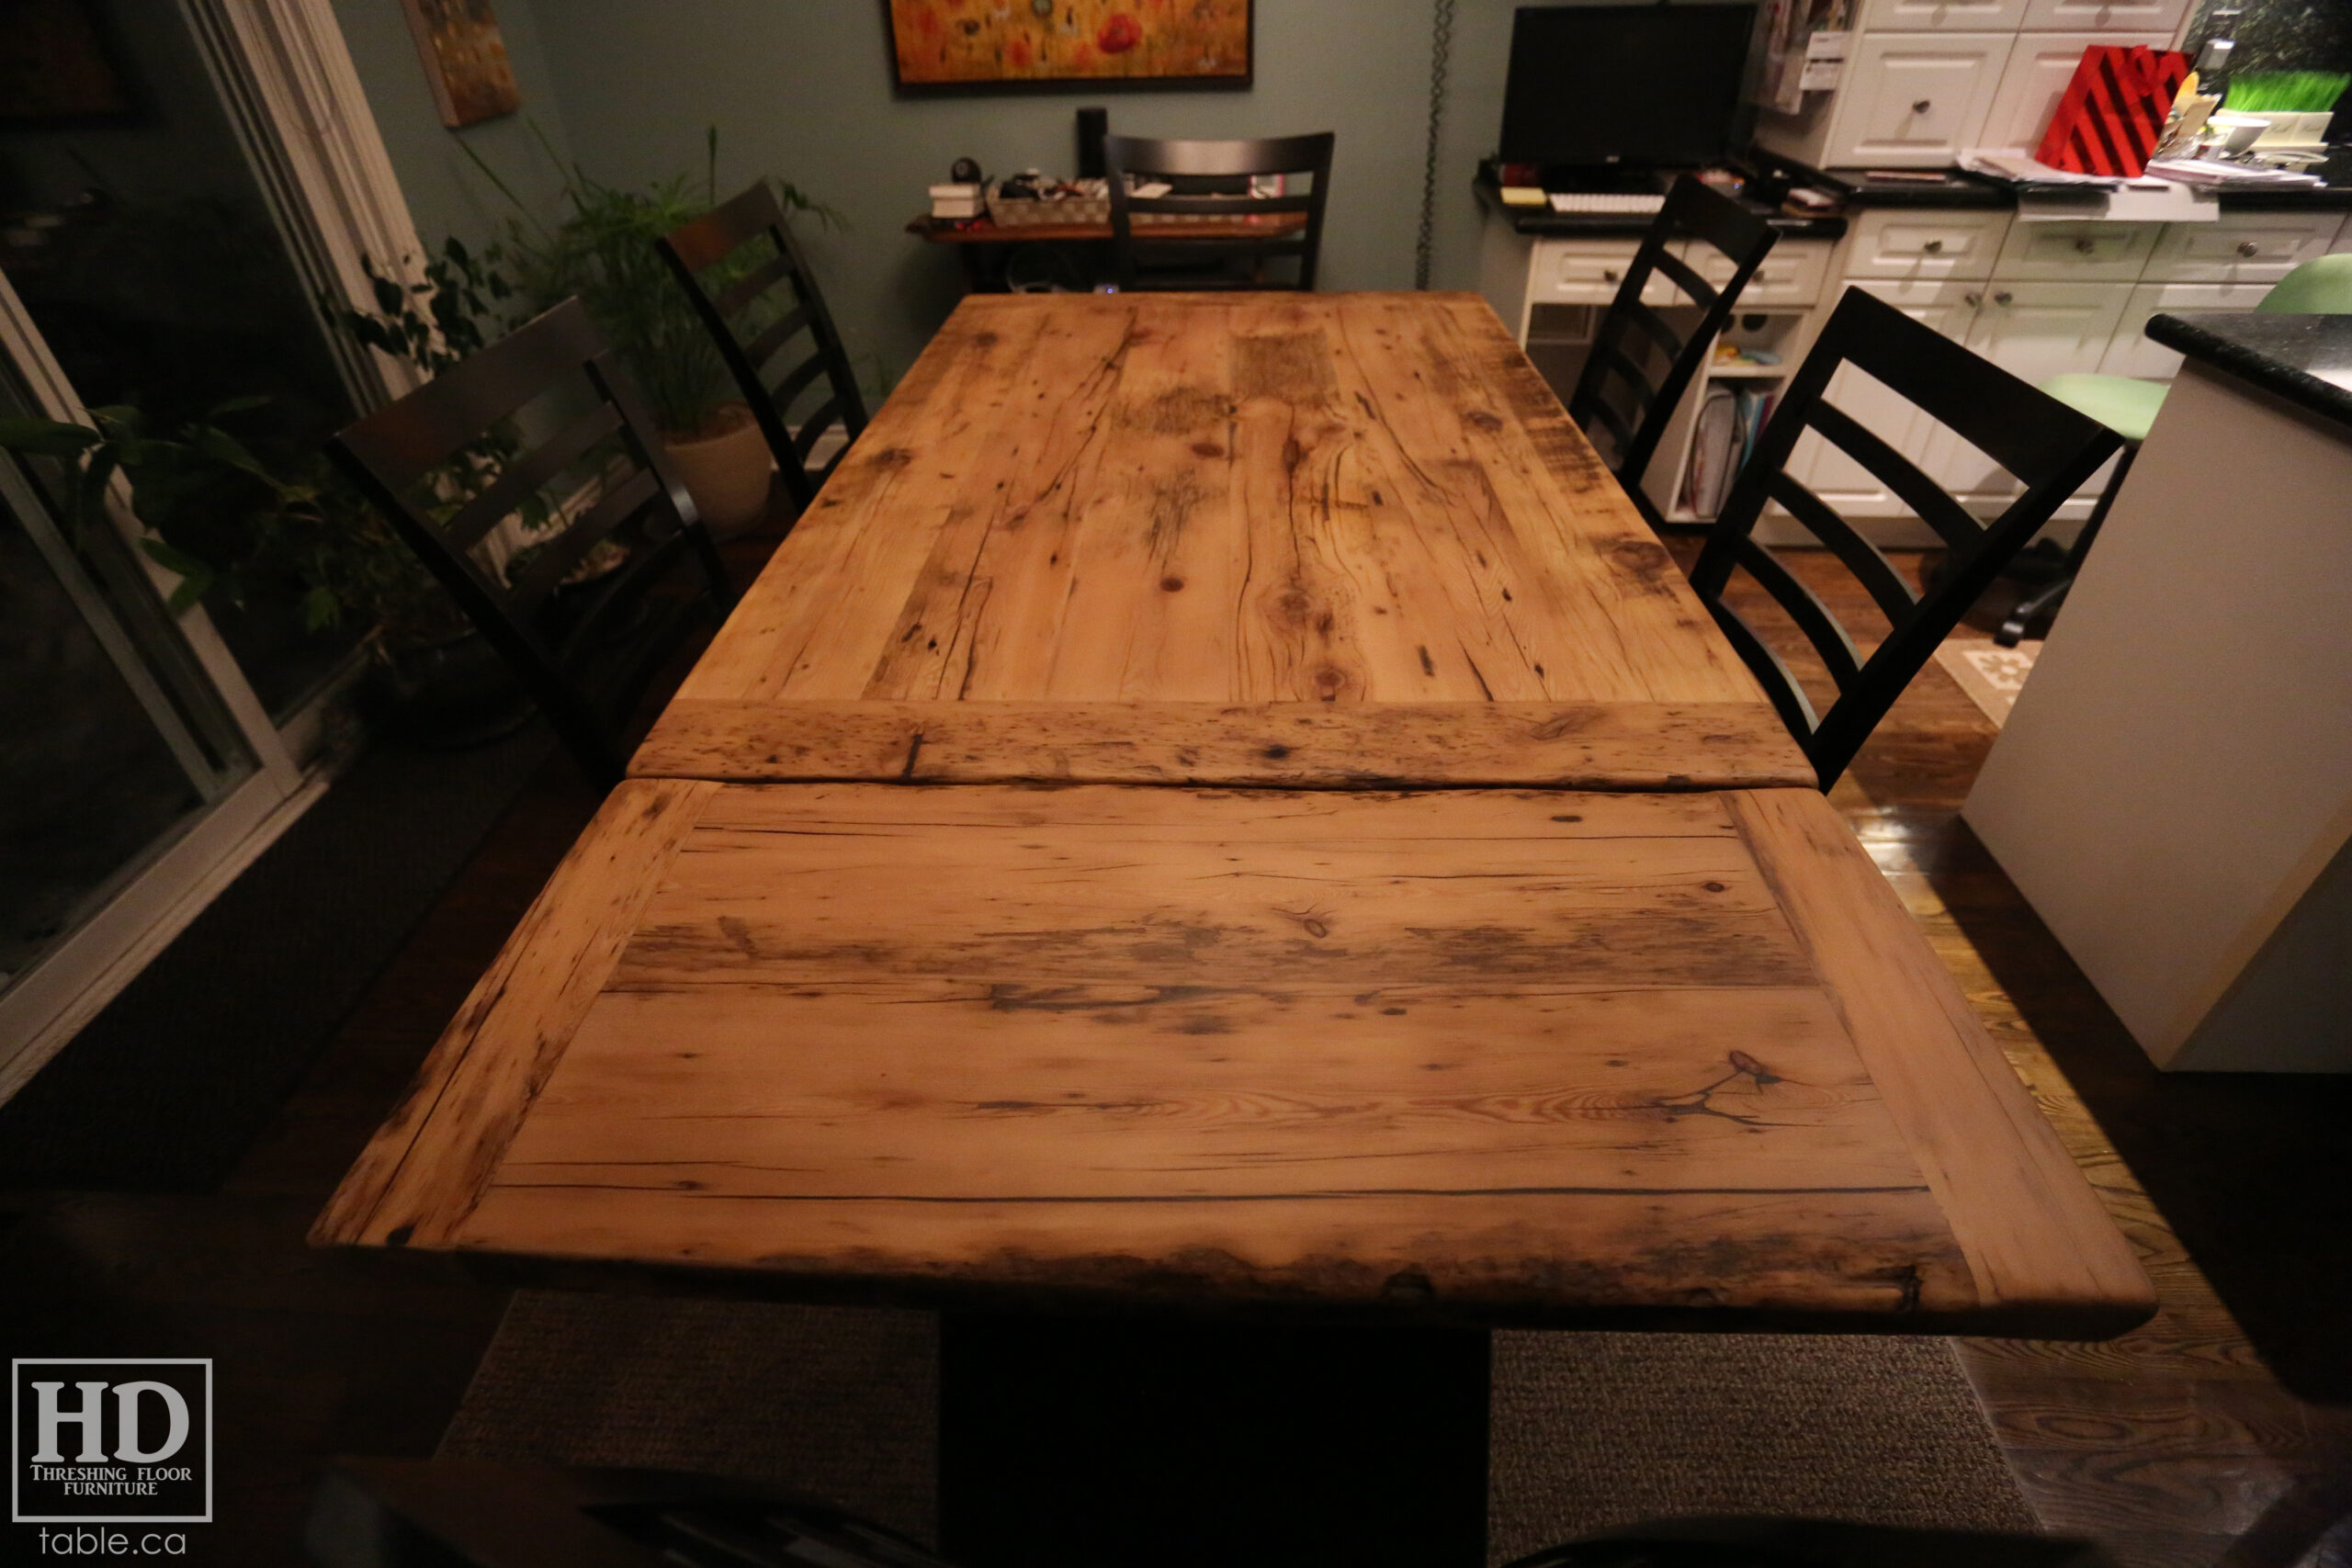 Custom Reclaimed Wood Table with Epoxy Finish by HD Threshing Floor Furniture / www.table.ca